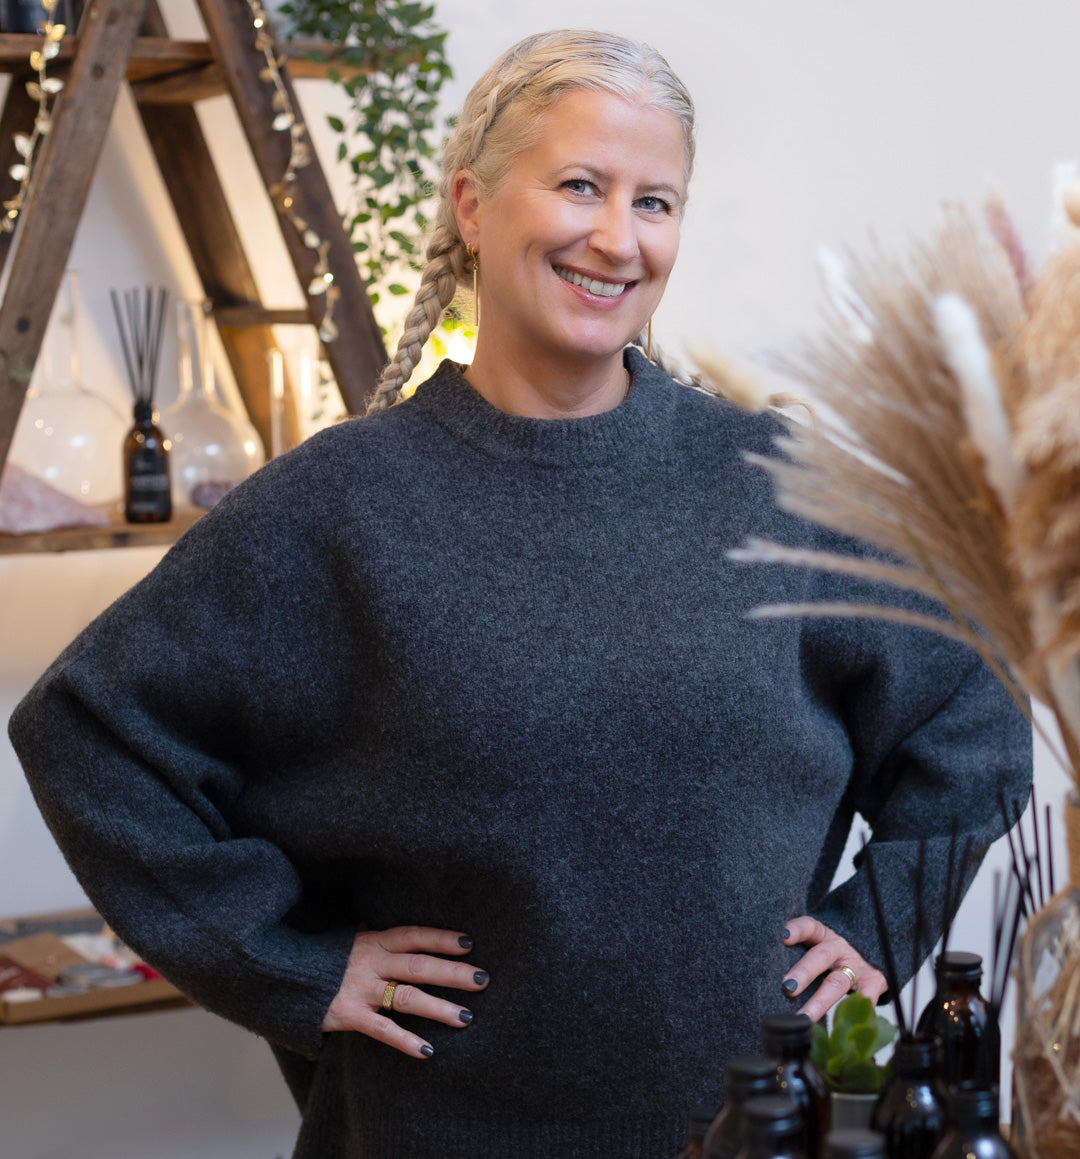 A confident woman with a beaming smile and silver braided hair poses in a cozy charcoal grey sweater. She stands in a workshop space adorned with dried pampas grass and a wooden ladder festooned with fairy lights. In the background, an assortment of amber glass bottles and aroma diffusers on a shelf contribute to the warm, inviting ambiance of the natural skincare workshop